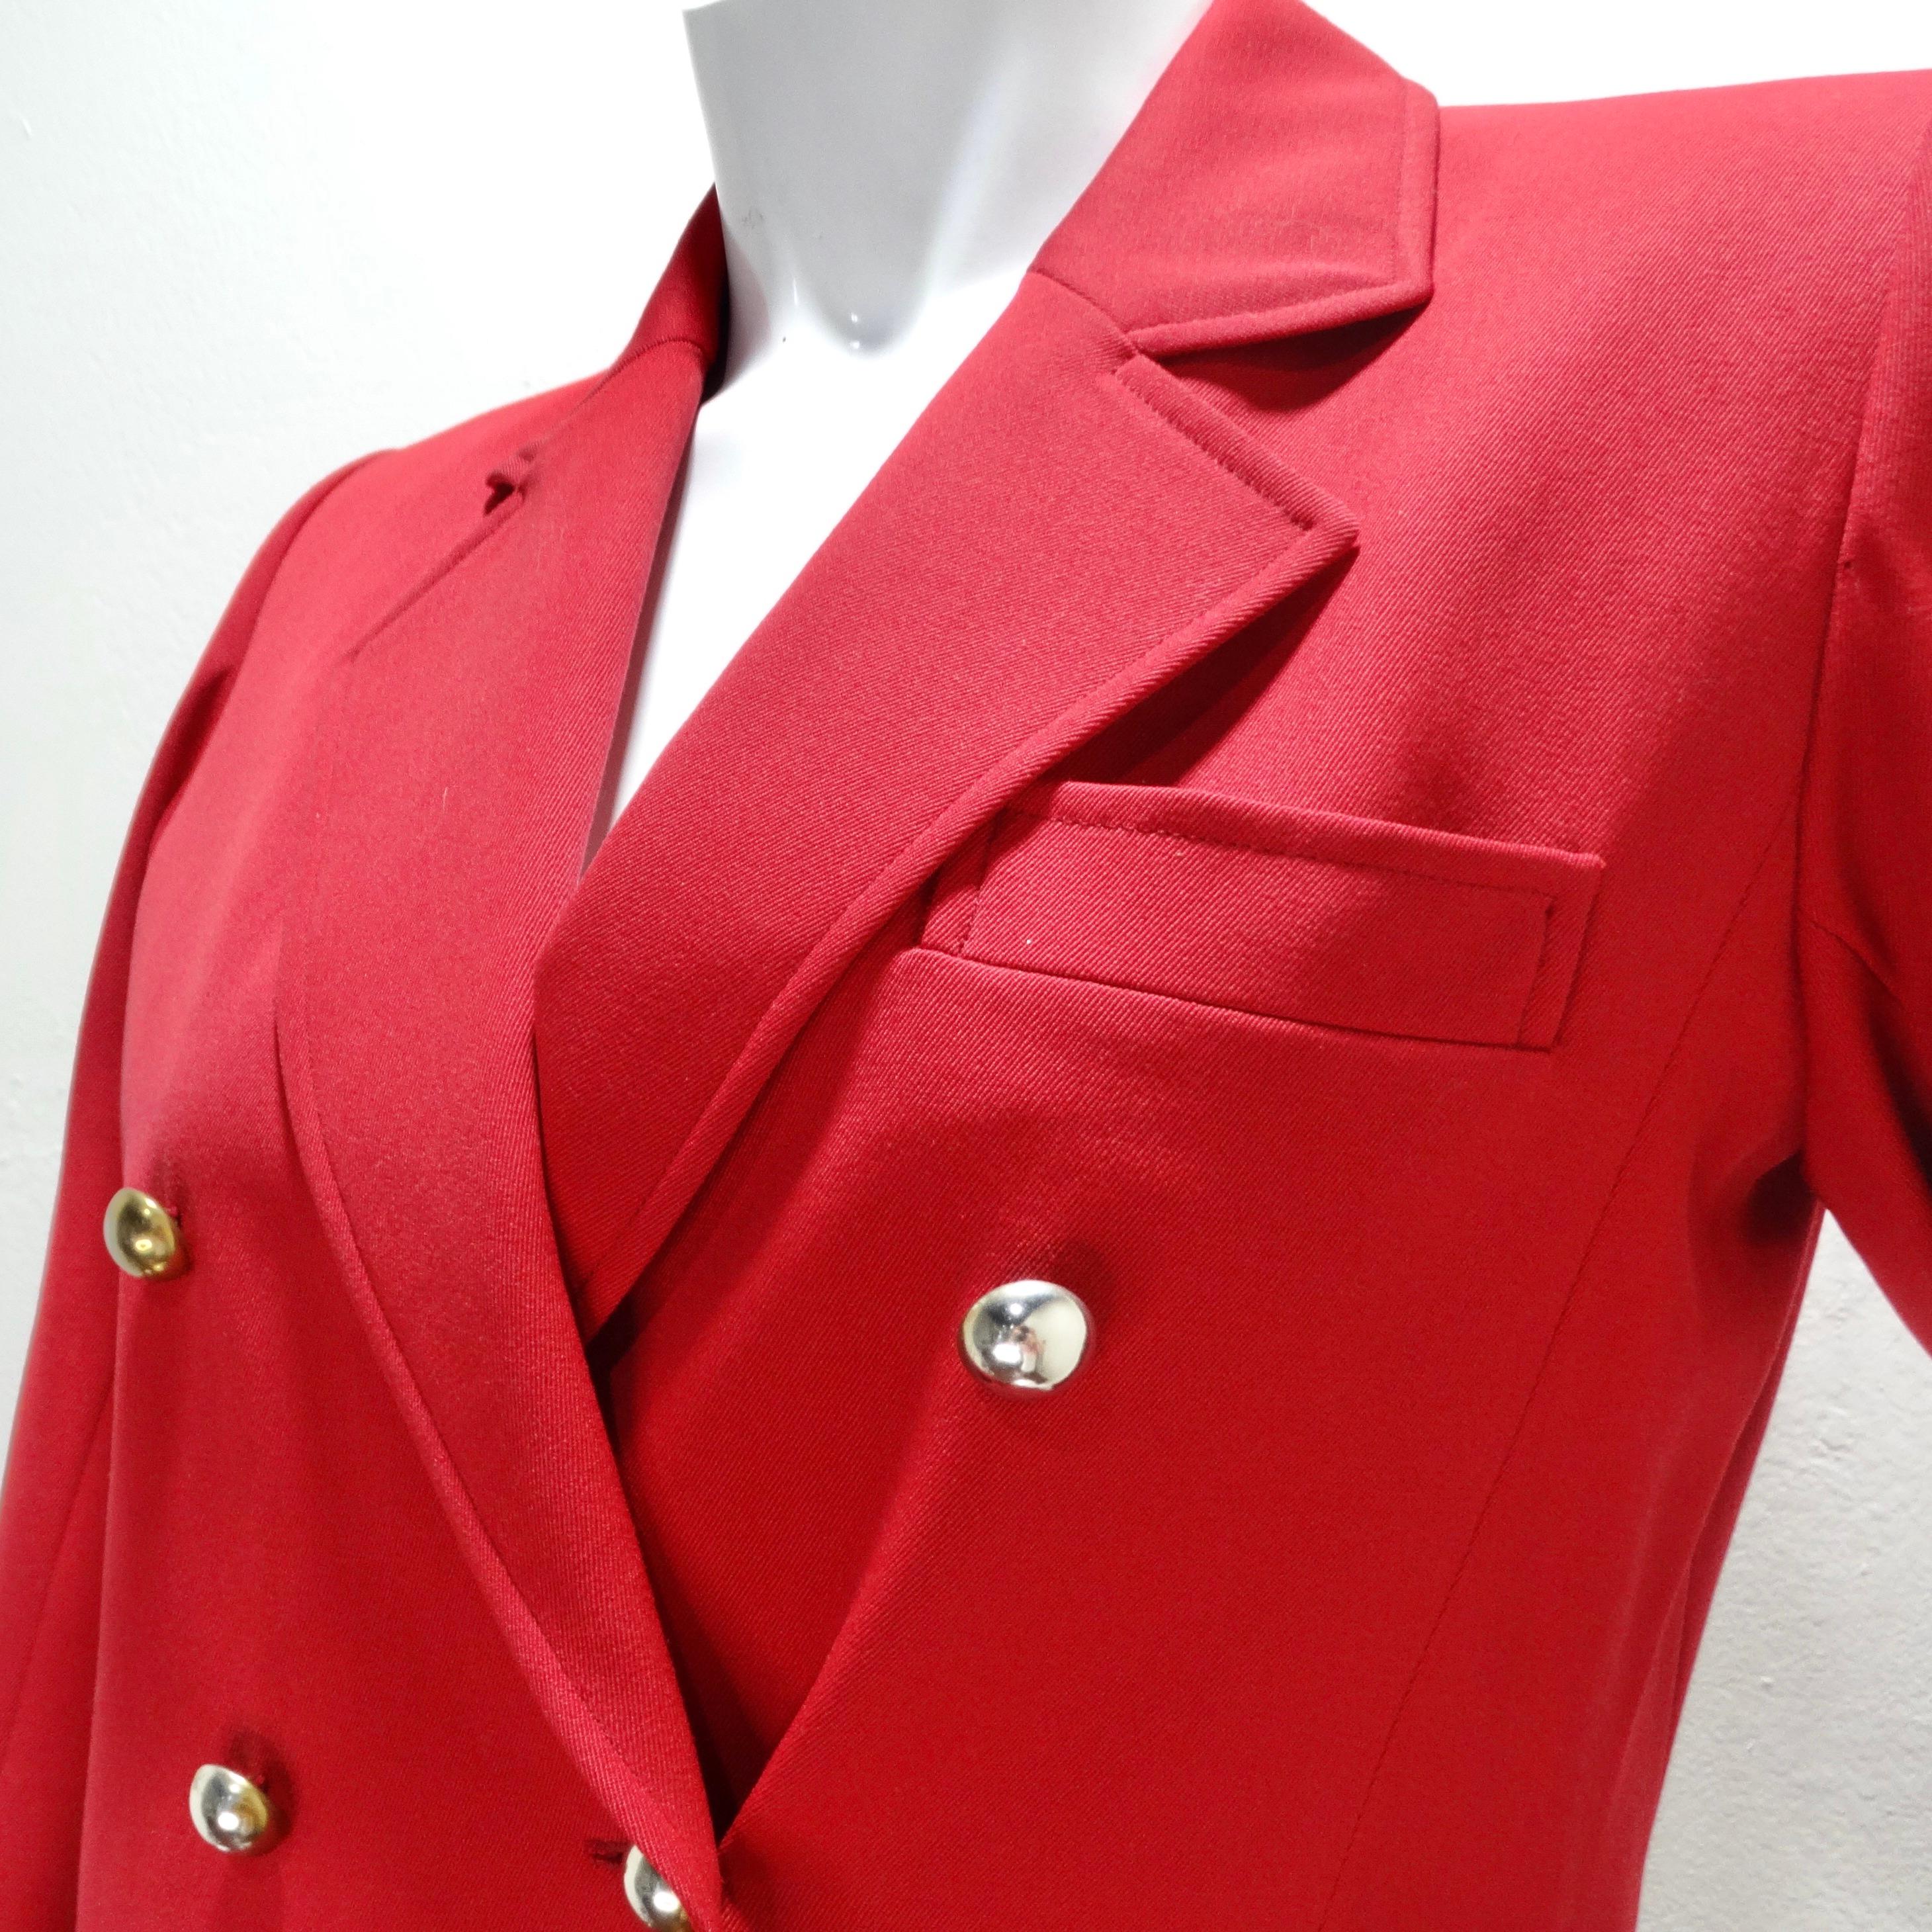 Yves Saint Laurent 1980s Red Blazer In Good Condition For Sale In Scottsdale, AZ